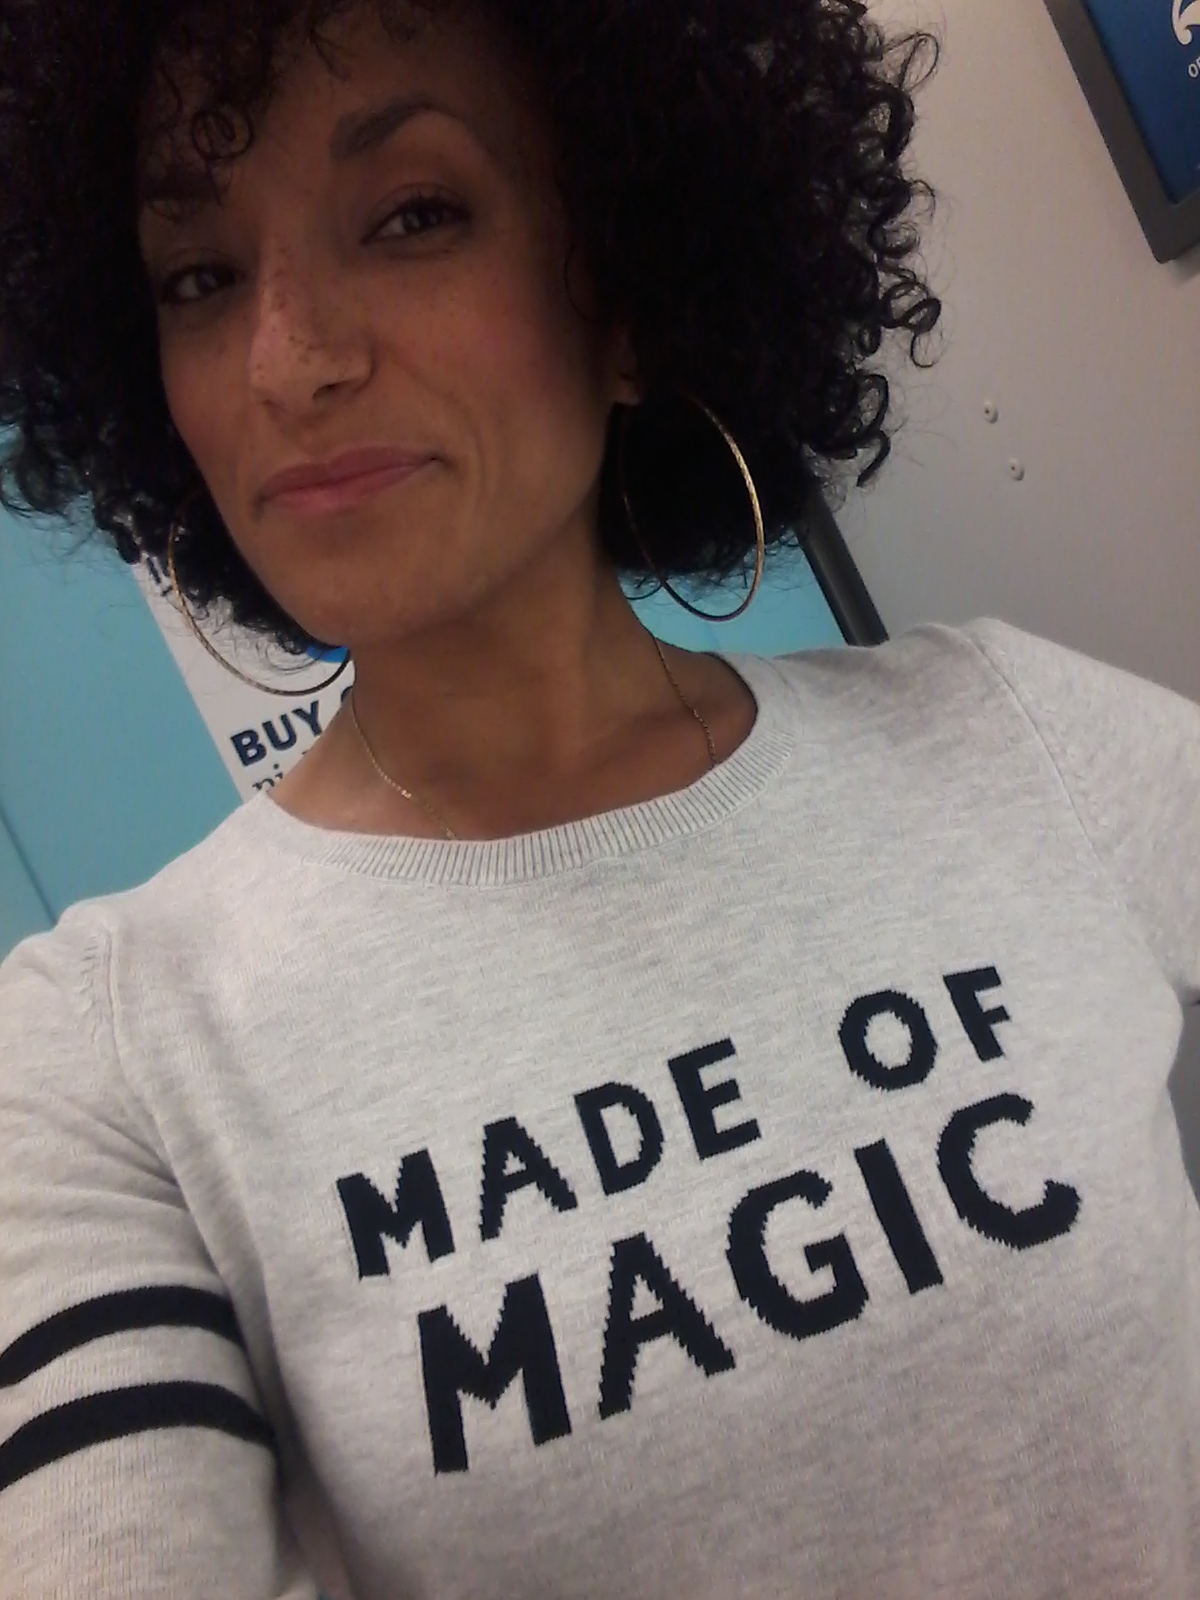 We are all made of magic.